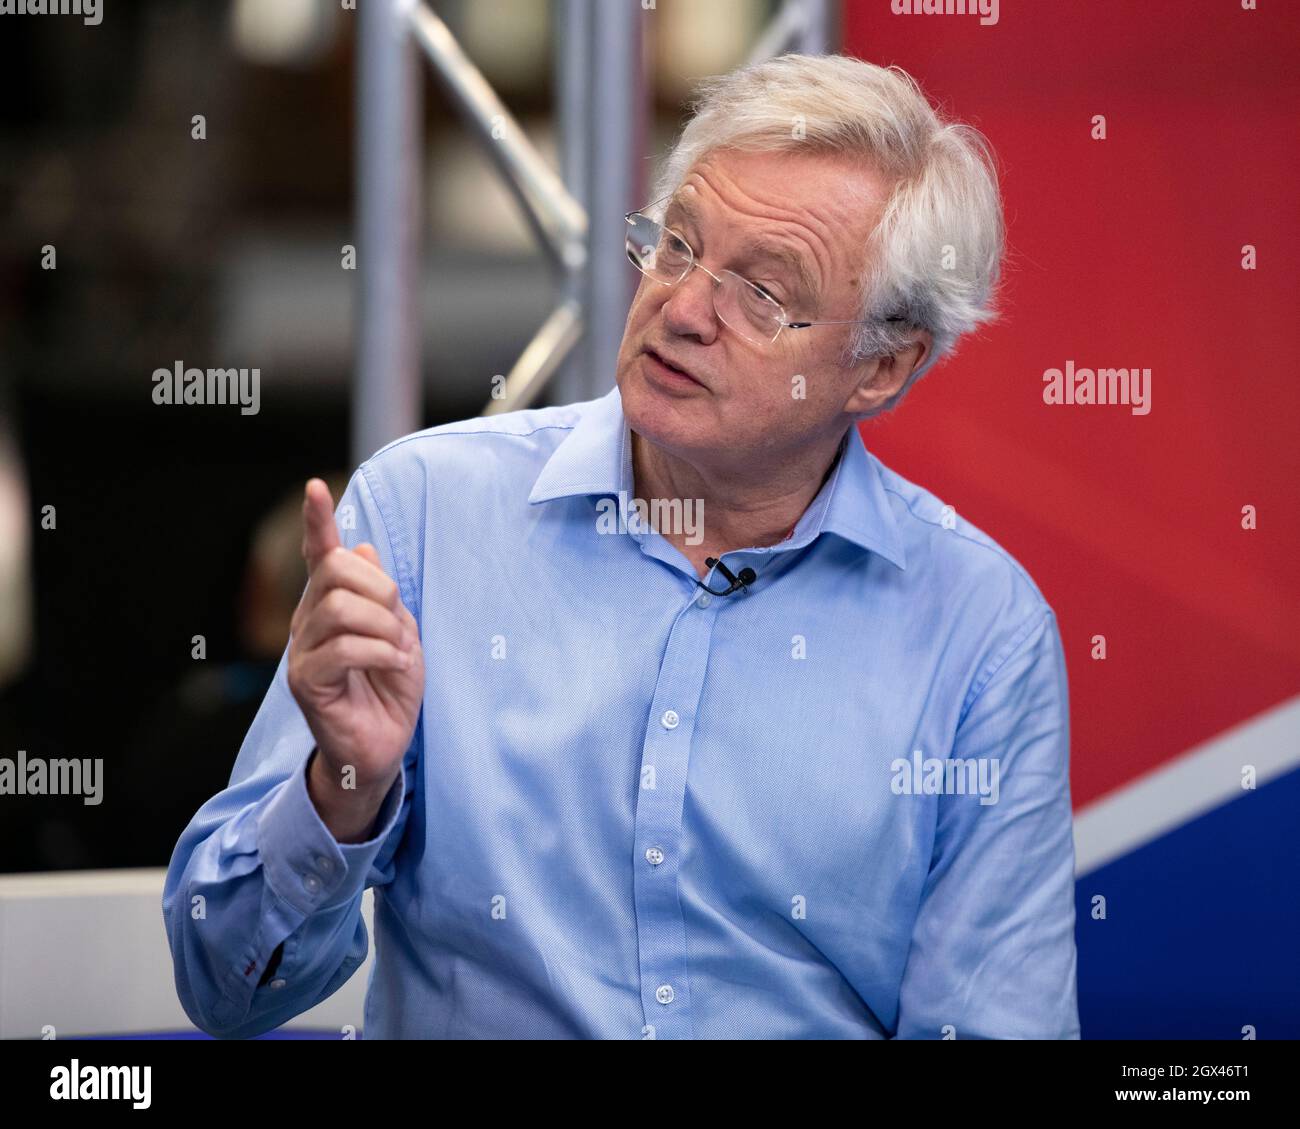 Manchester, England, UK. 4th Oct, 2021. PICTURED: David Davis MP, Former Brexit Cabinet Secretary speaking live on GB News. Scenes from the morning at the Conservative Party Conference Credit: Colin Fisher/Alamy Live News Stock Photo